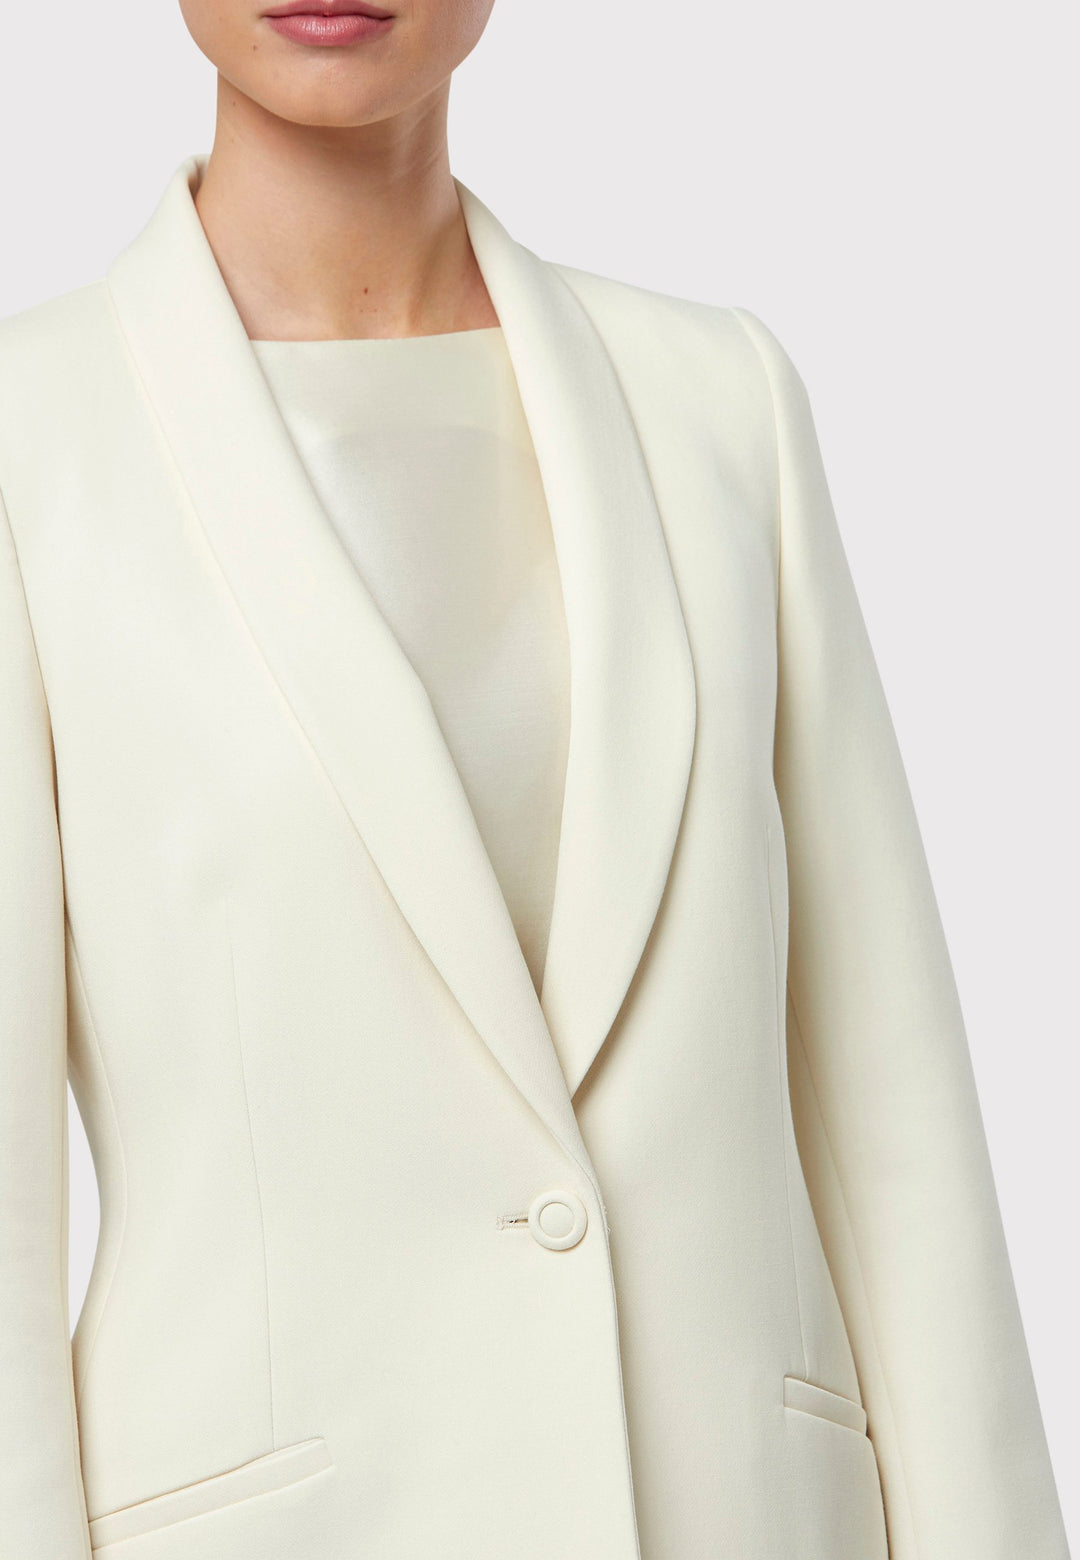 Darcie Ivory Jacket, a cornerstone for the discerning minimalist. This impeccably tailored tuxedo jacket exudes timeless elegance, featuring a seamless shawl collar and welt pockets. The semi-fitted silhouette is enhanced by a single button closure, ensuring a flattering and sophisticated look. Expertly crafted from our signature tricotine, it promises comfort and ease with just the right amount of stretch. For a polished tuxedo look, pair it with the matching Jill Ivory Trouser.